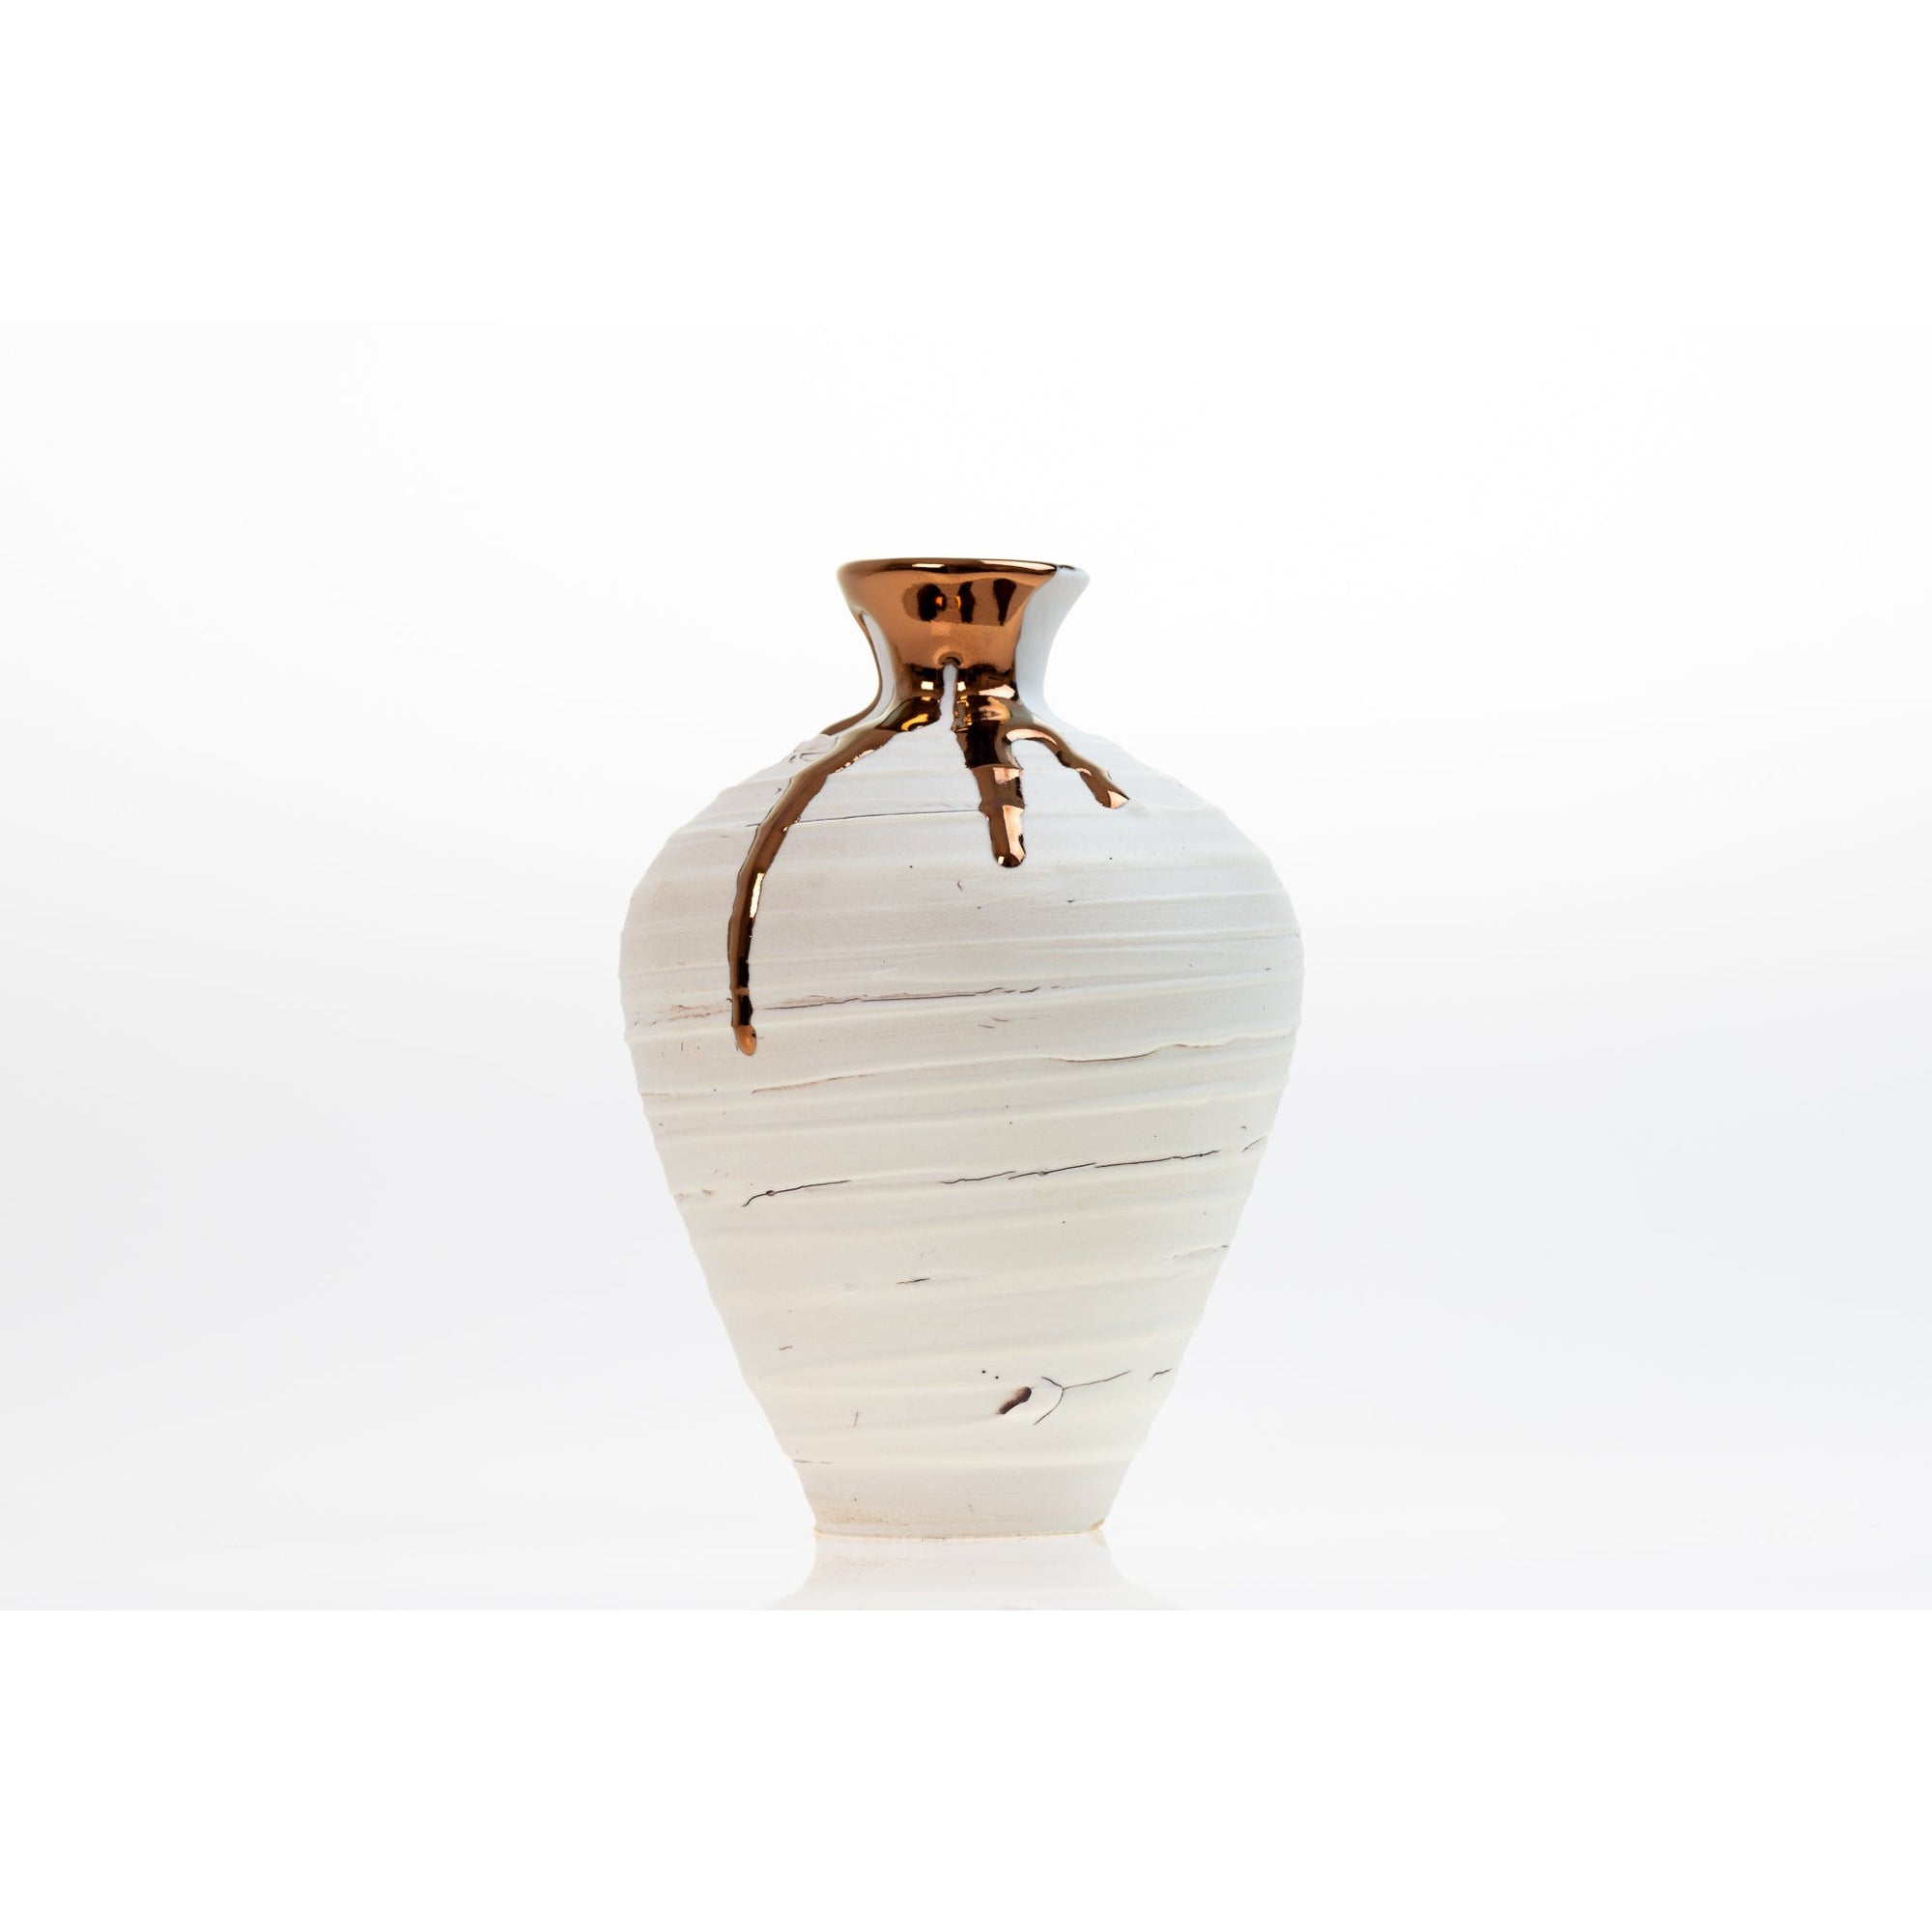 PGX33 Crackle Textured Vase with Copper Lustre by Alex McCarthy, available at Padstow Gallery, Cornwall